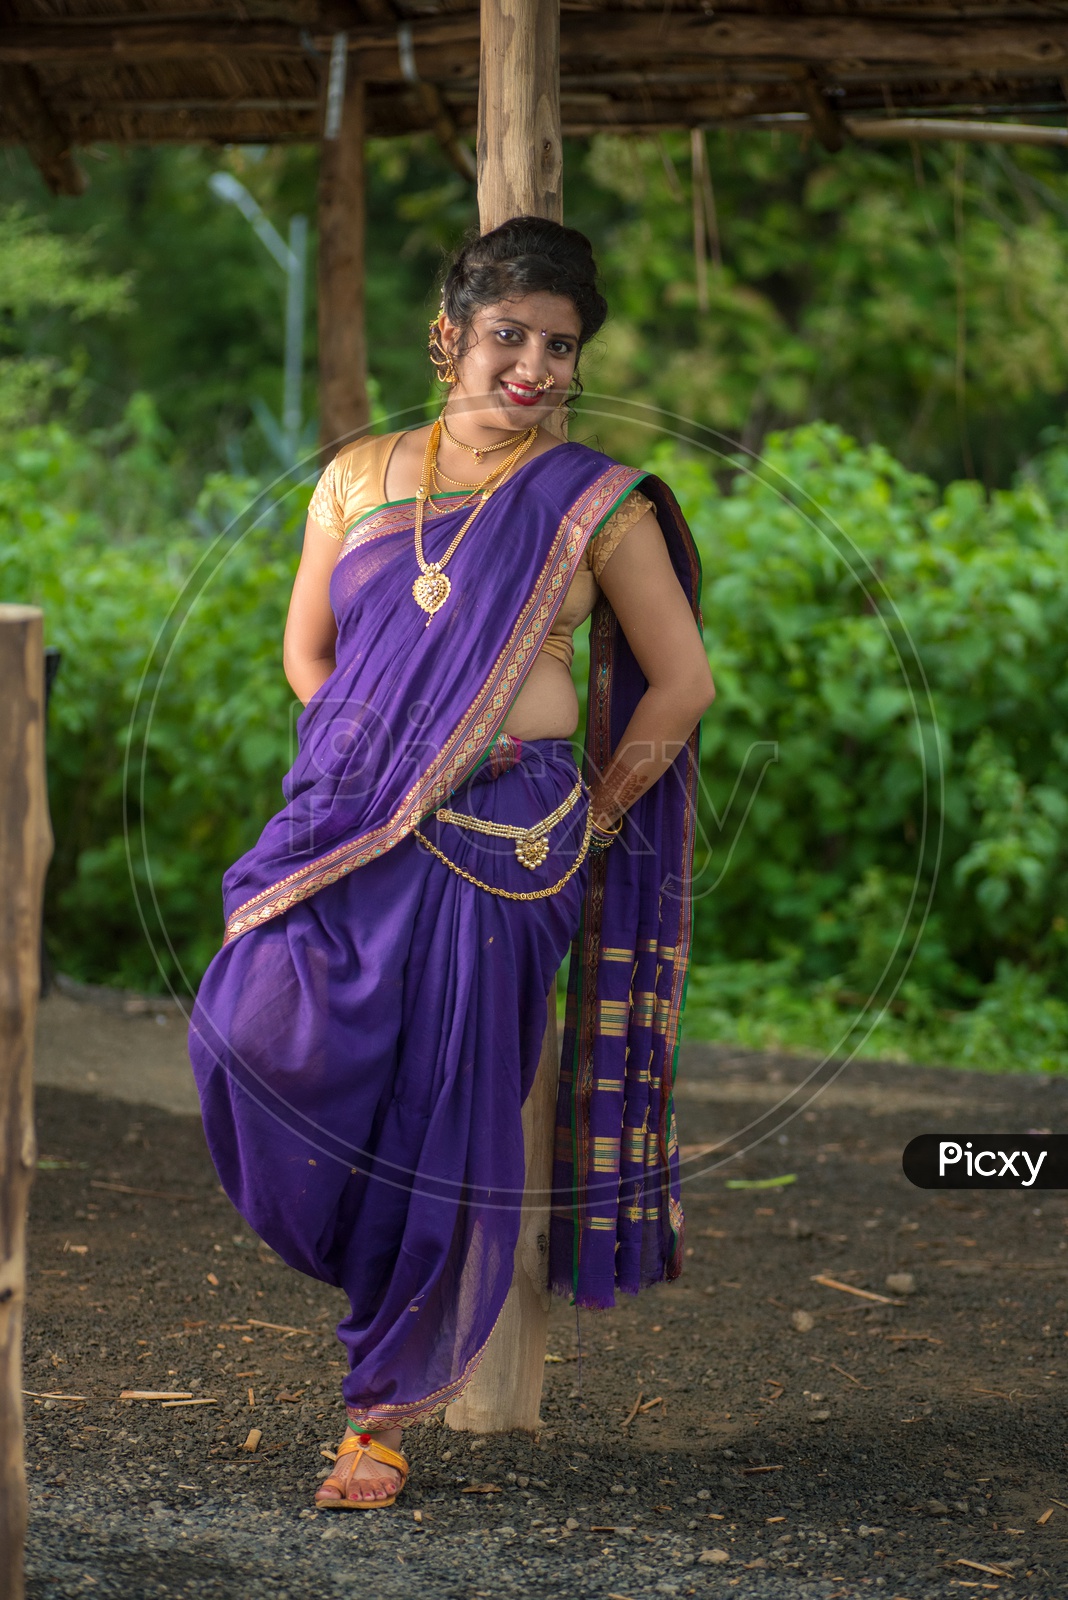 Image of Indian traditional Beautiful Woman Wearing an traditional Saree  And Posing On The Outdoor With a Smile Face-QP185219-Picxy